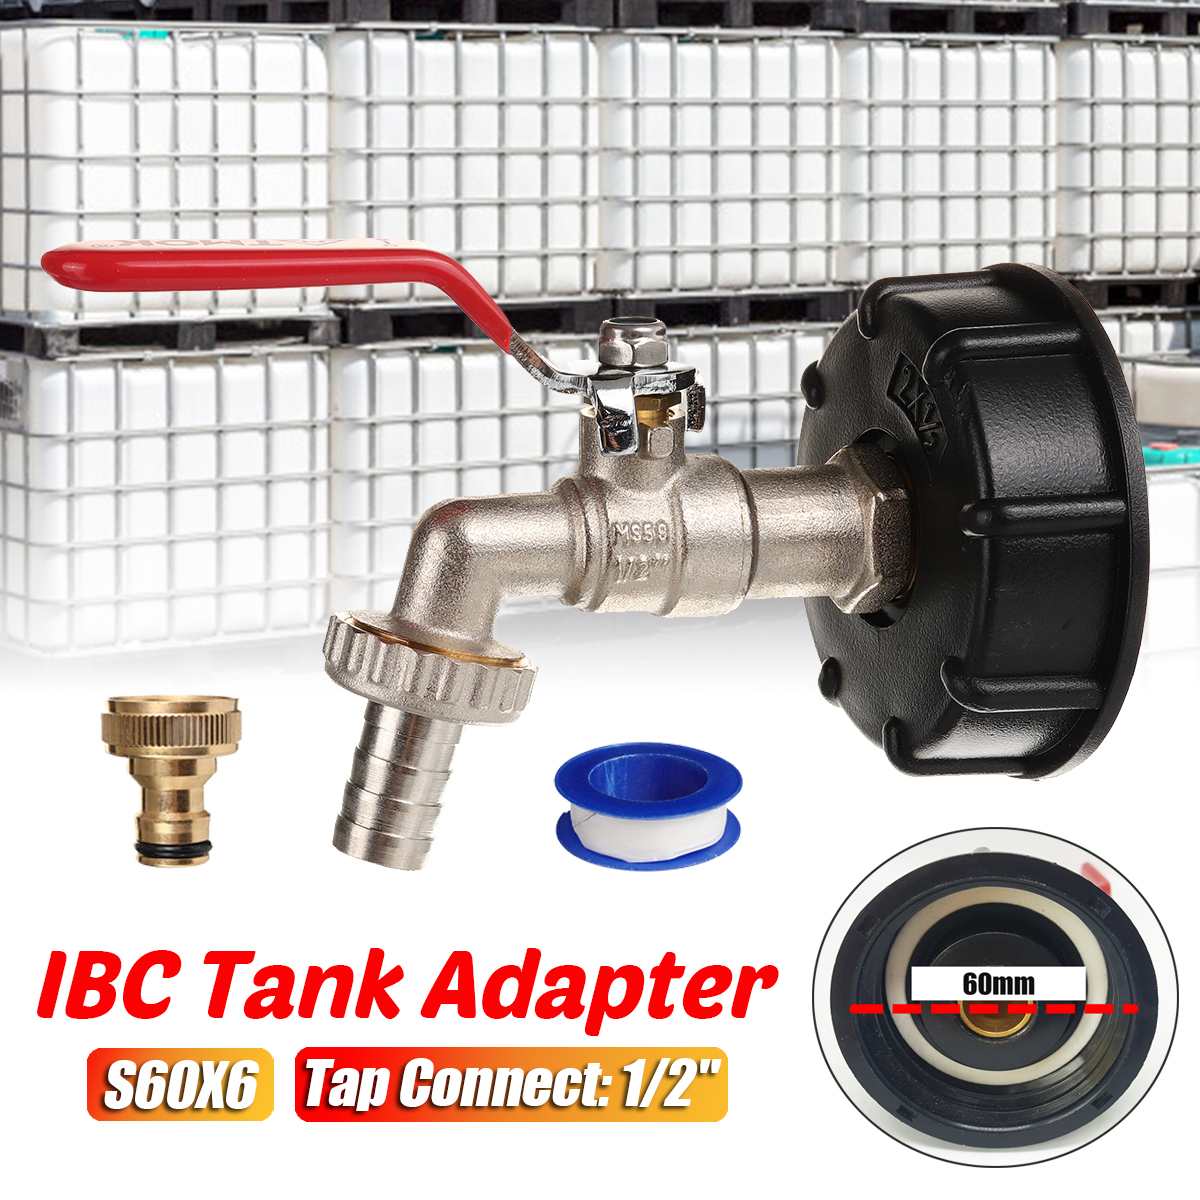 IBC-Tank-Adapter-to-12Yard-Garden-Water-Tap-Hose-Connector-Fitting-Tool-S60X6-1952469-2